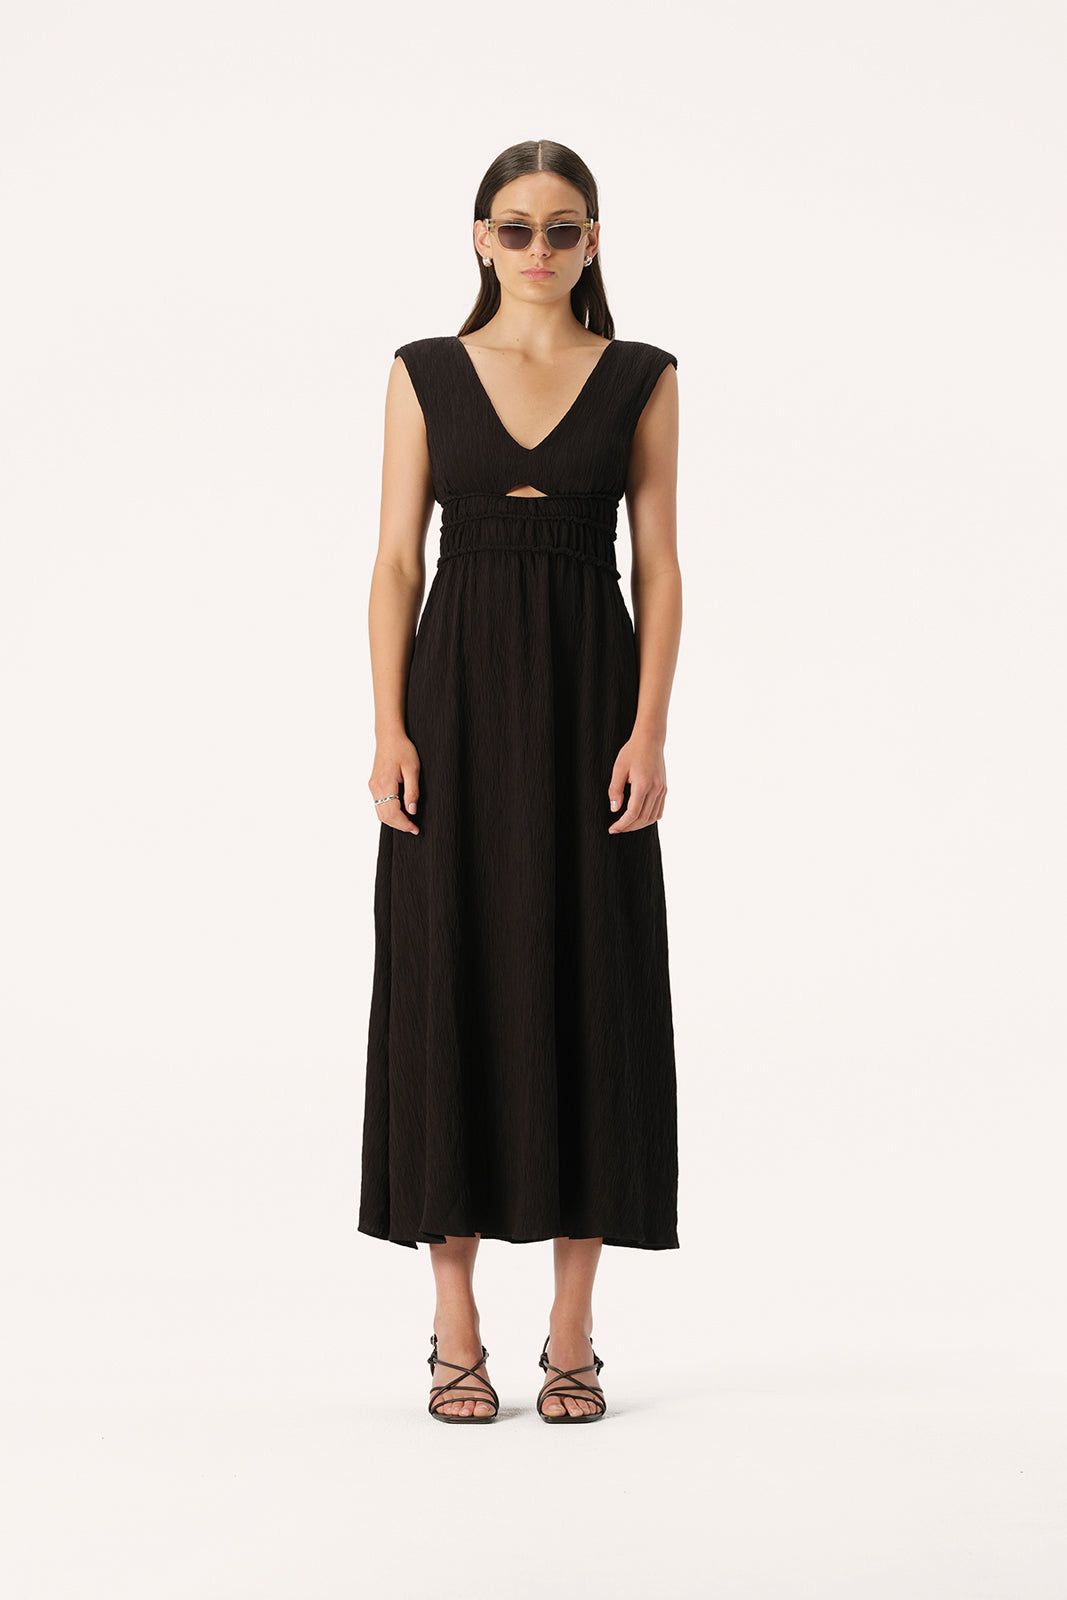 Evian Gathered Sleeveless Maxi Dress in Black | Elka Collective